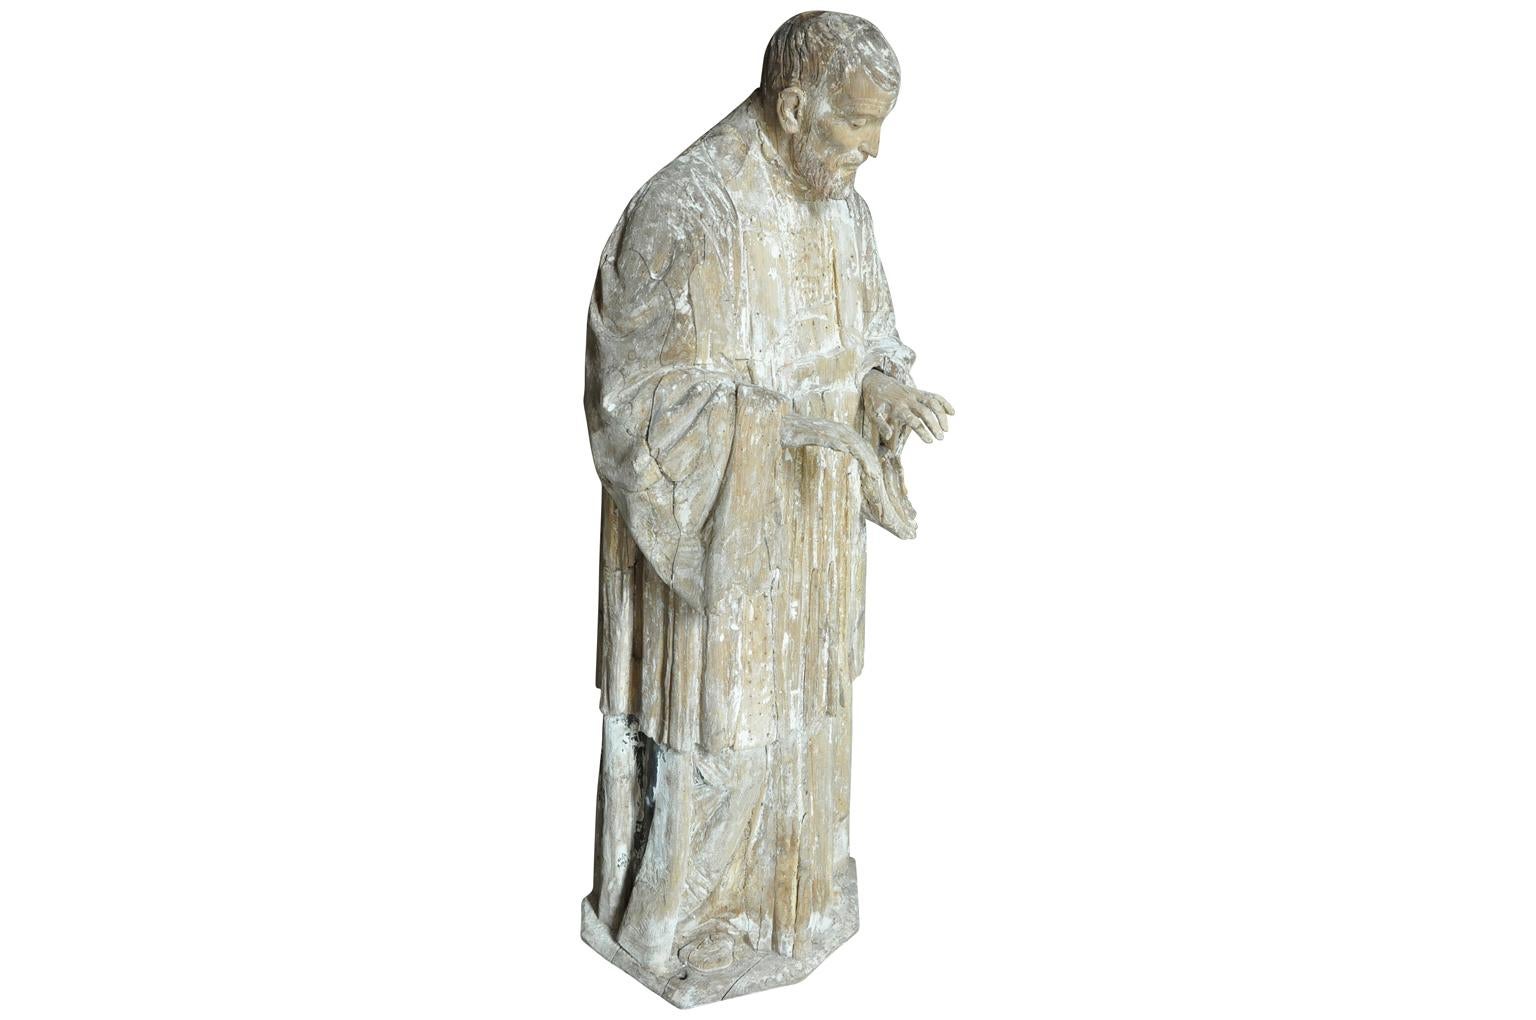 An outstanding and very handsome Spanish 18th century statue of Saint Francis of Xavier in carved wood. Wonderful detail and expression.